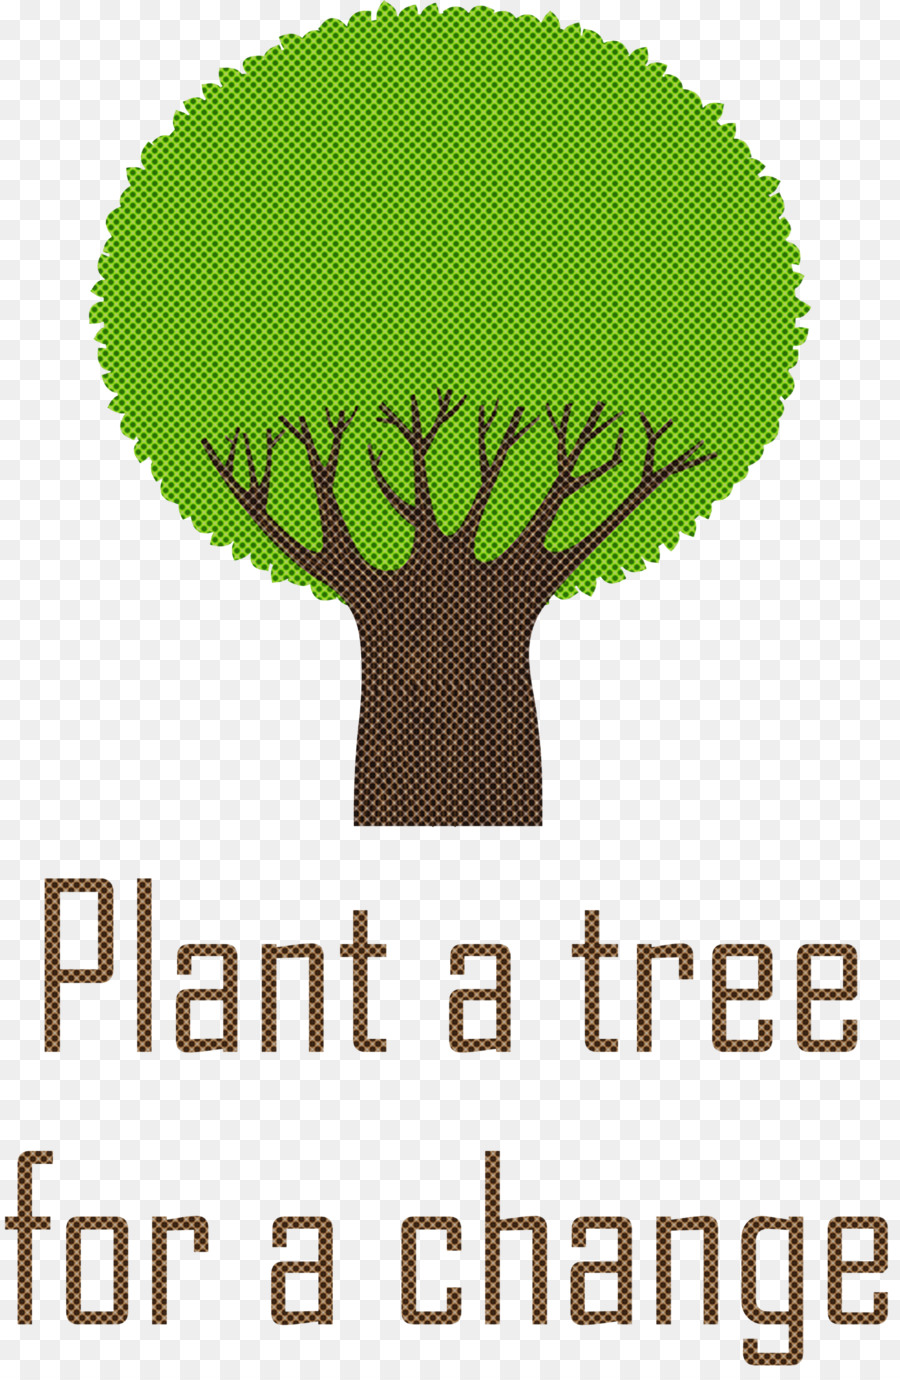 Plant a tree for a change arbor day